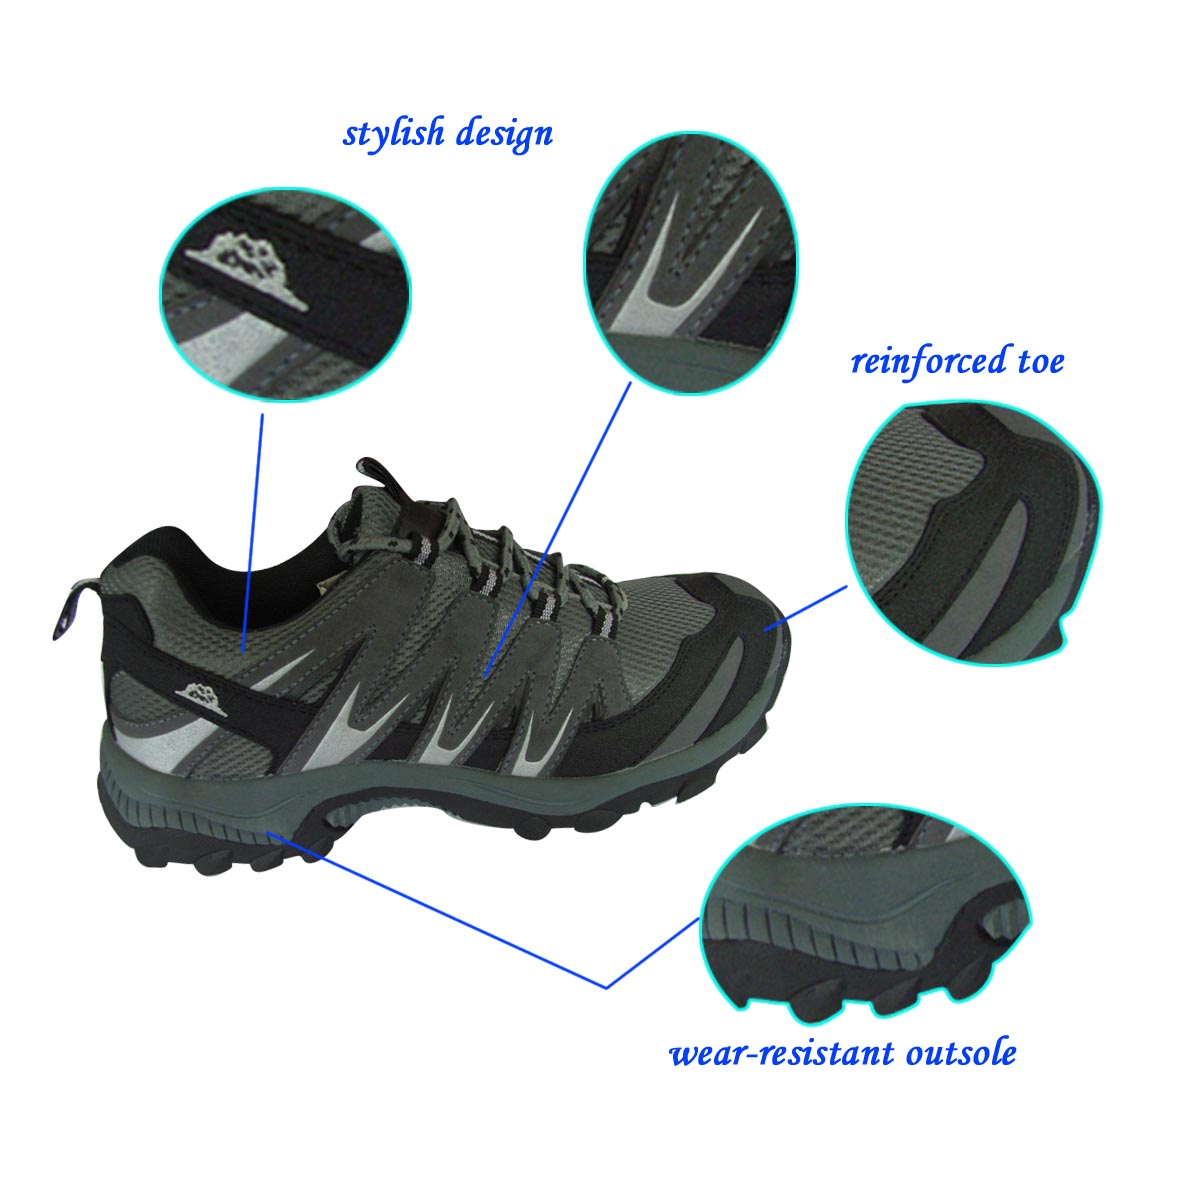 2017 New Product--Stylish Men's Hiking/ Mountain/Outdoor Shoes with Mesh+PU Upper and Durable MD Outsole